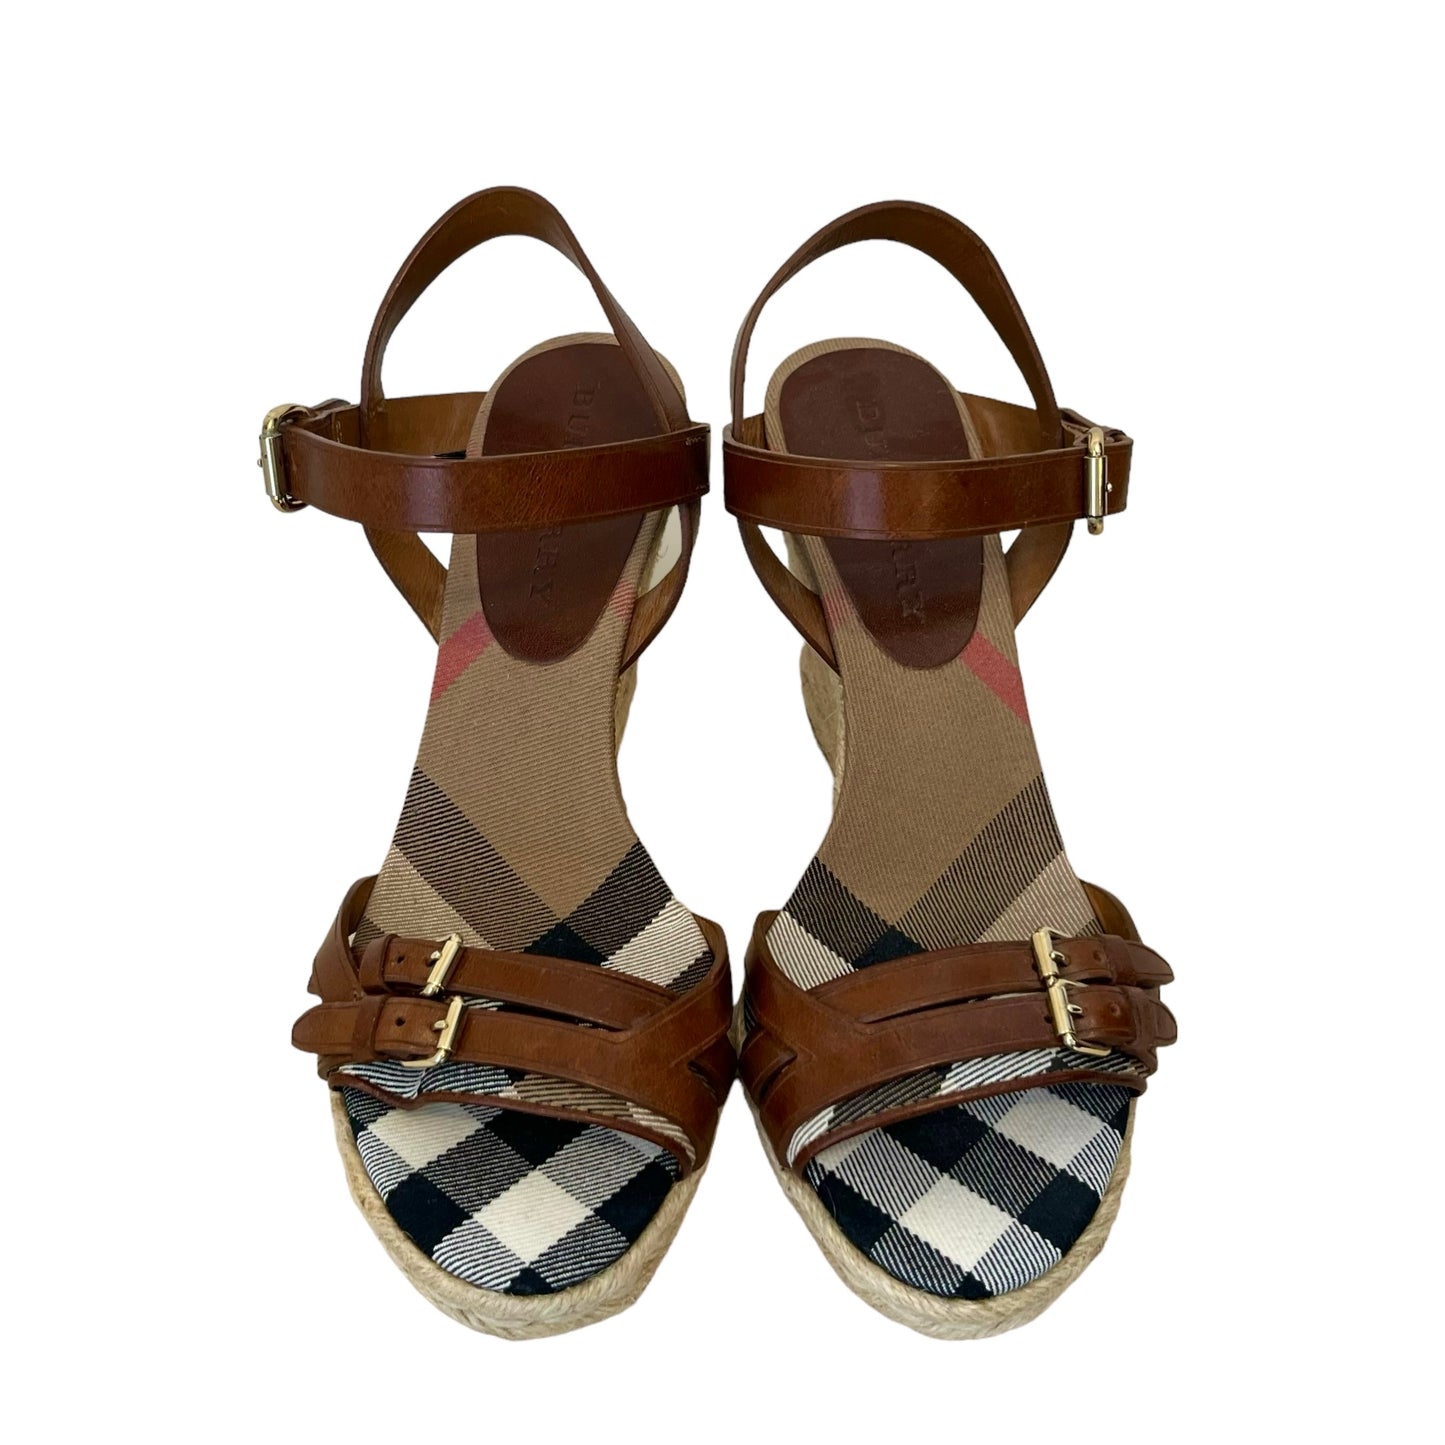 Burberry Wedge Sandals - 39